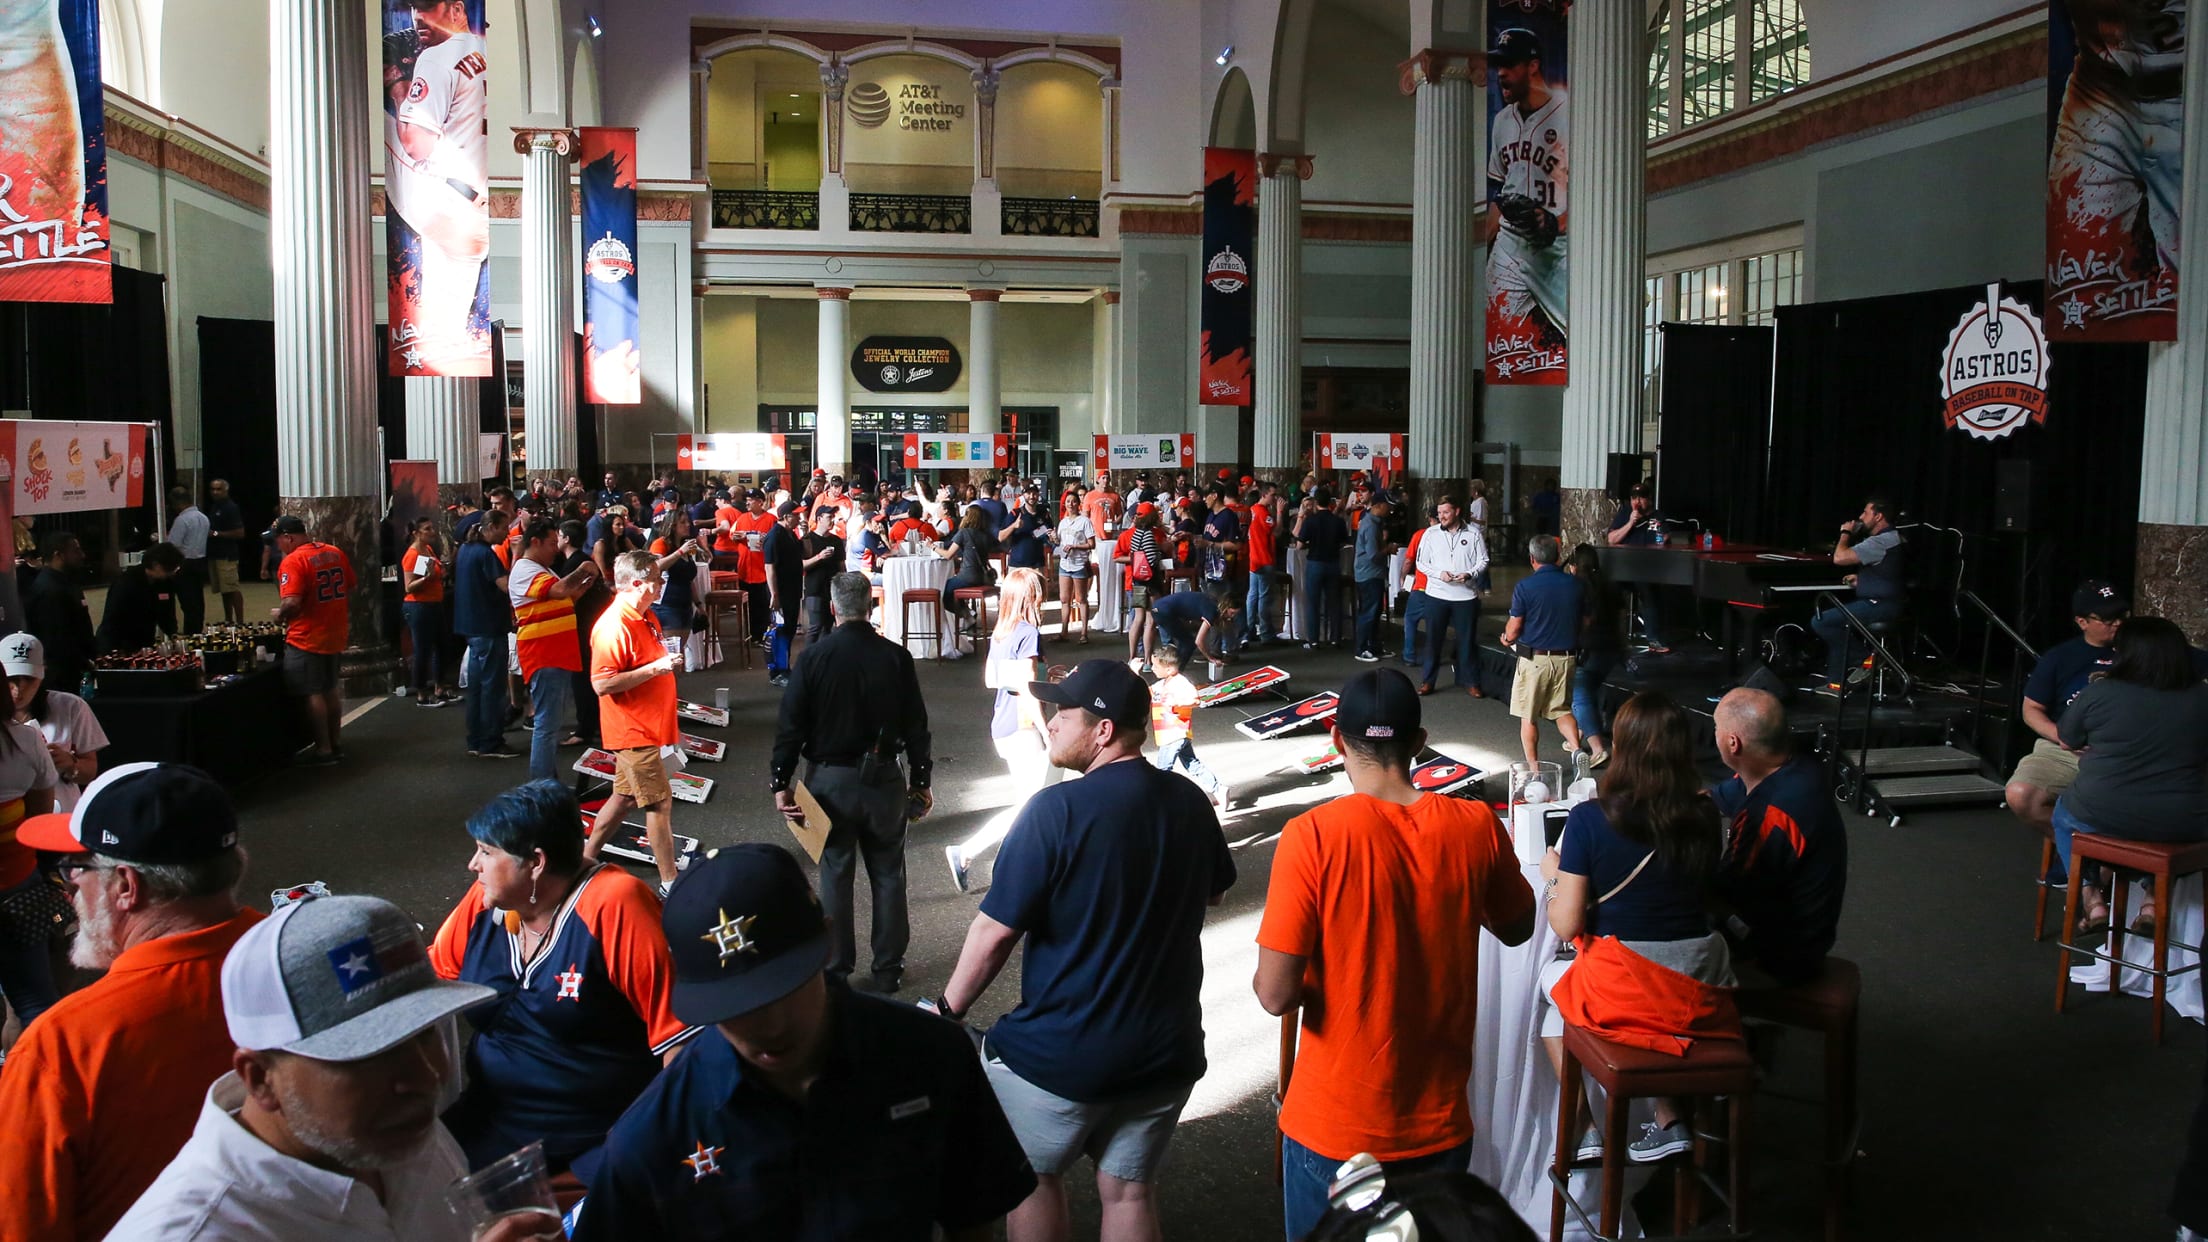 Houston Astros - The Astros Team Store, at Union Station